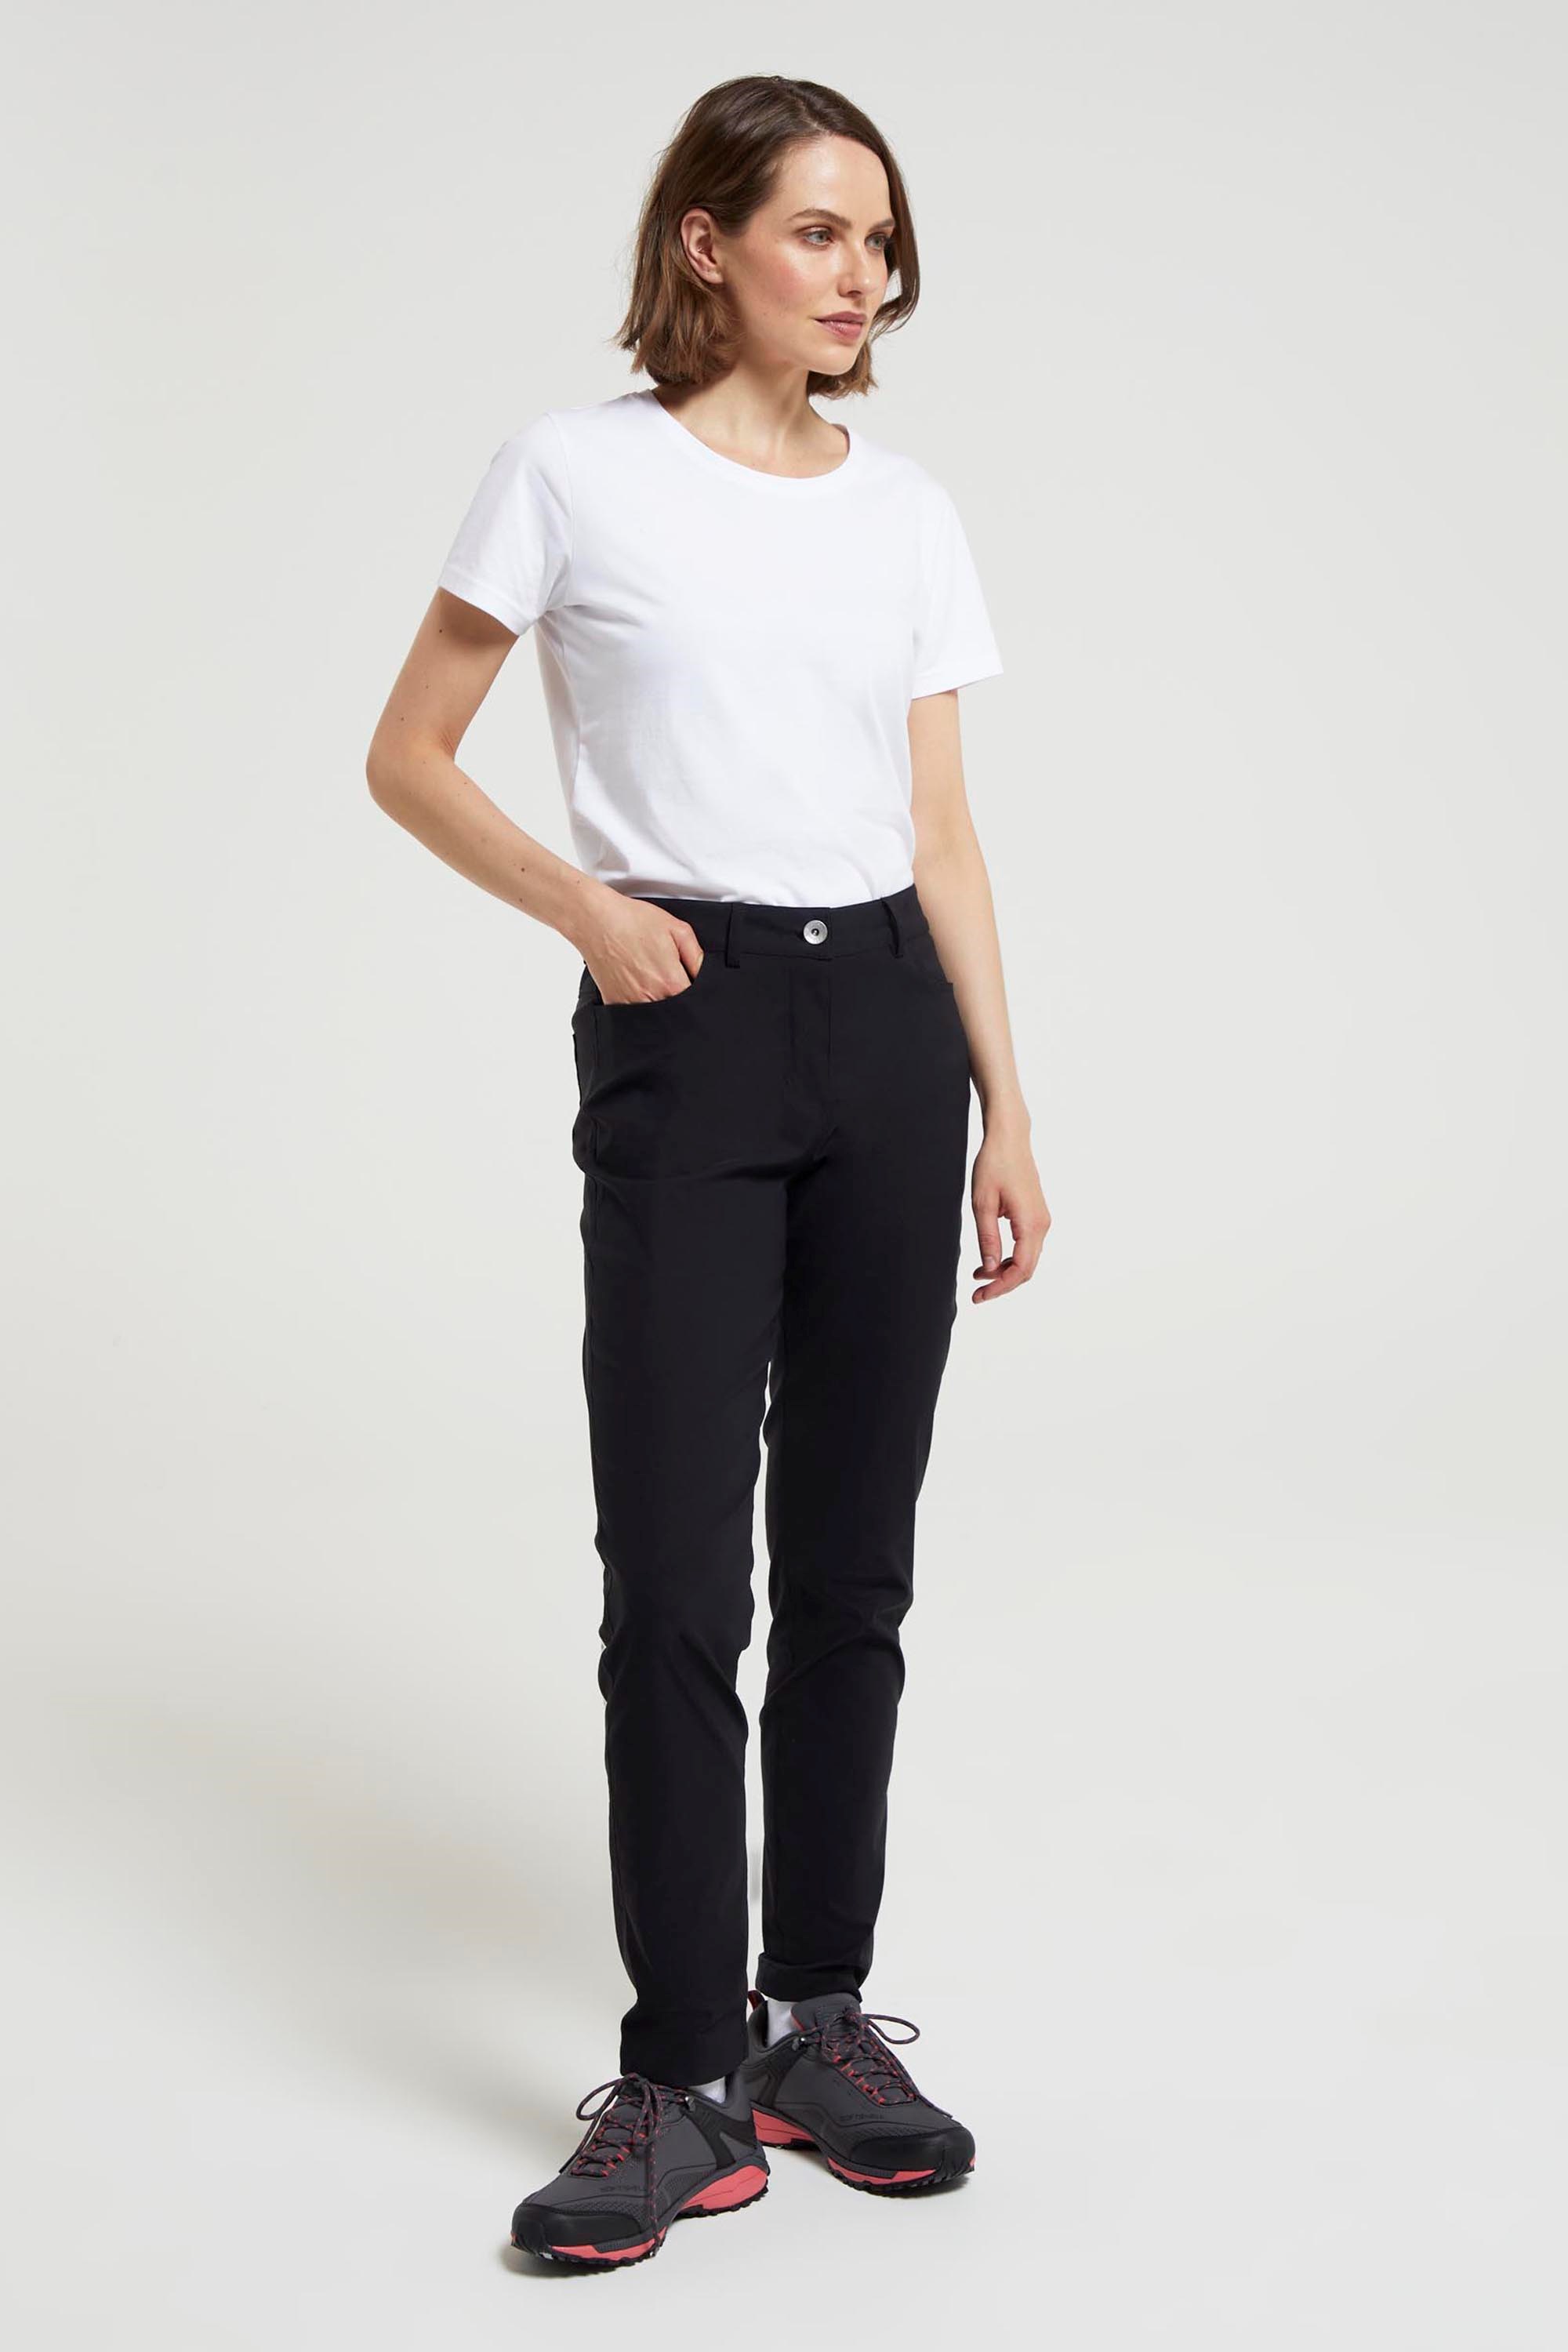 Forever And A Day - Lightweight Trousers for Women | Roxy